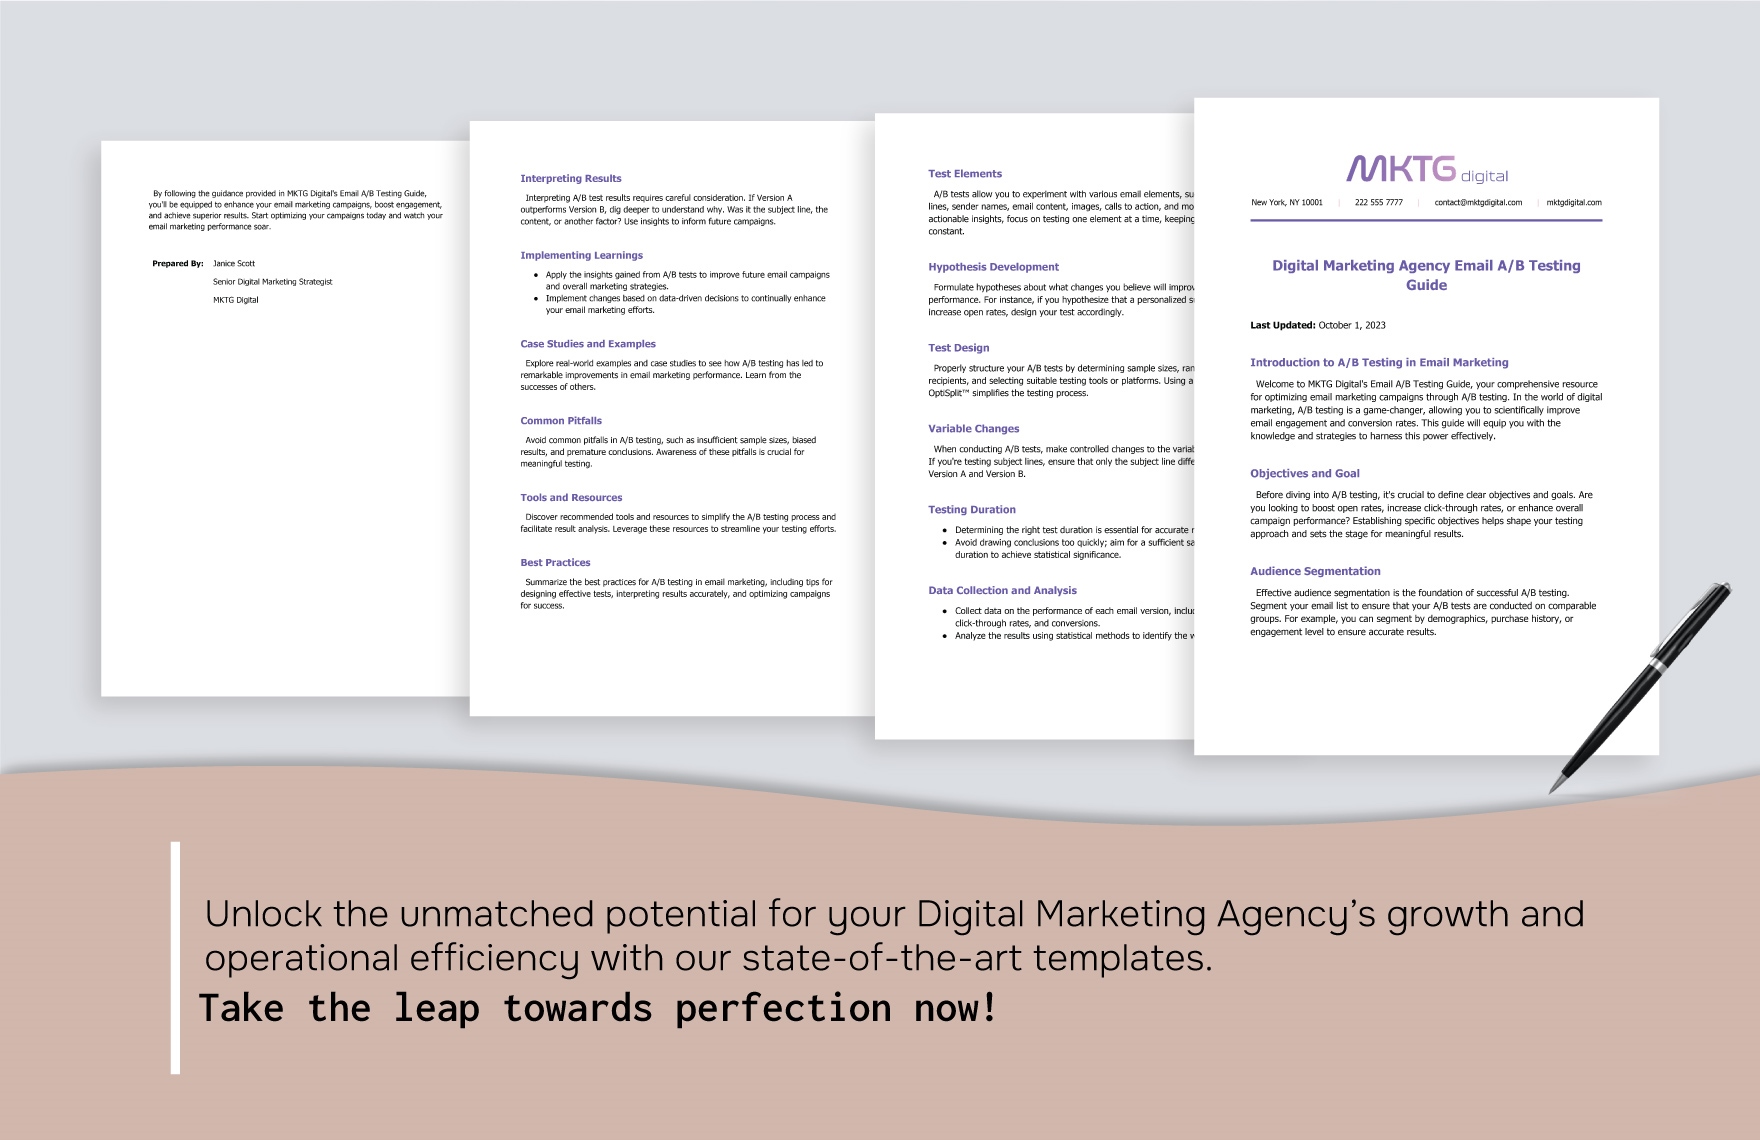 Digital Marketing Agency Email A/B Testing Guide Template